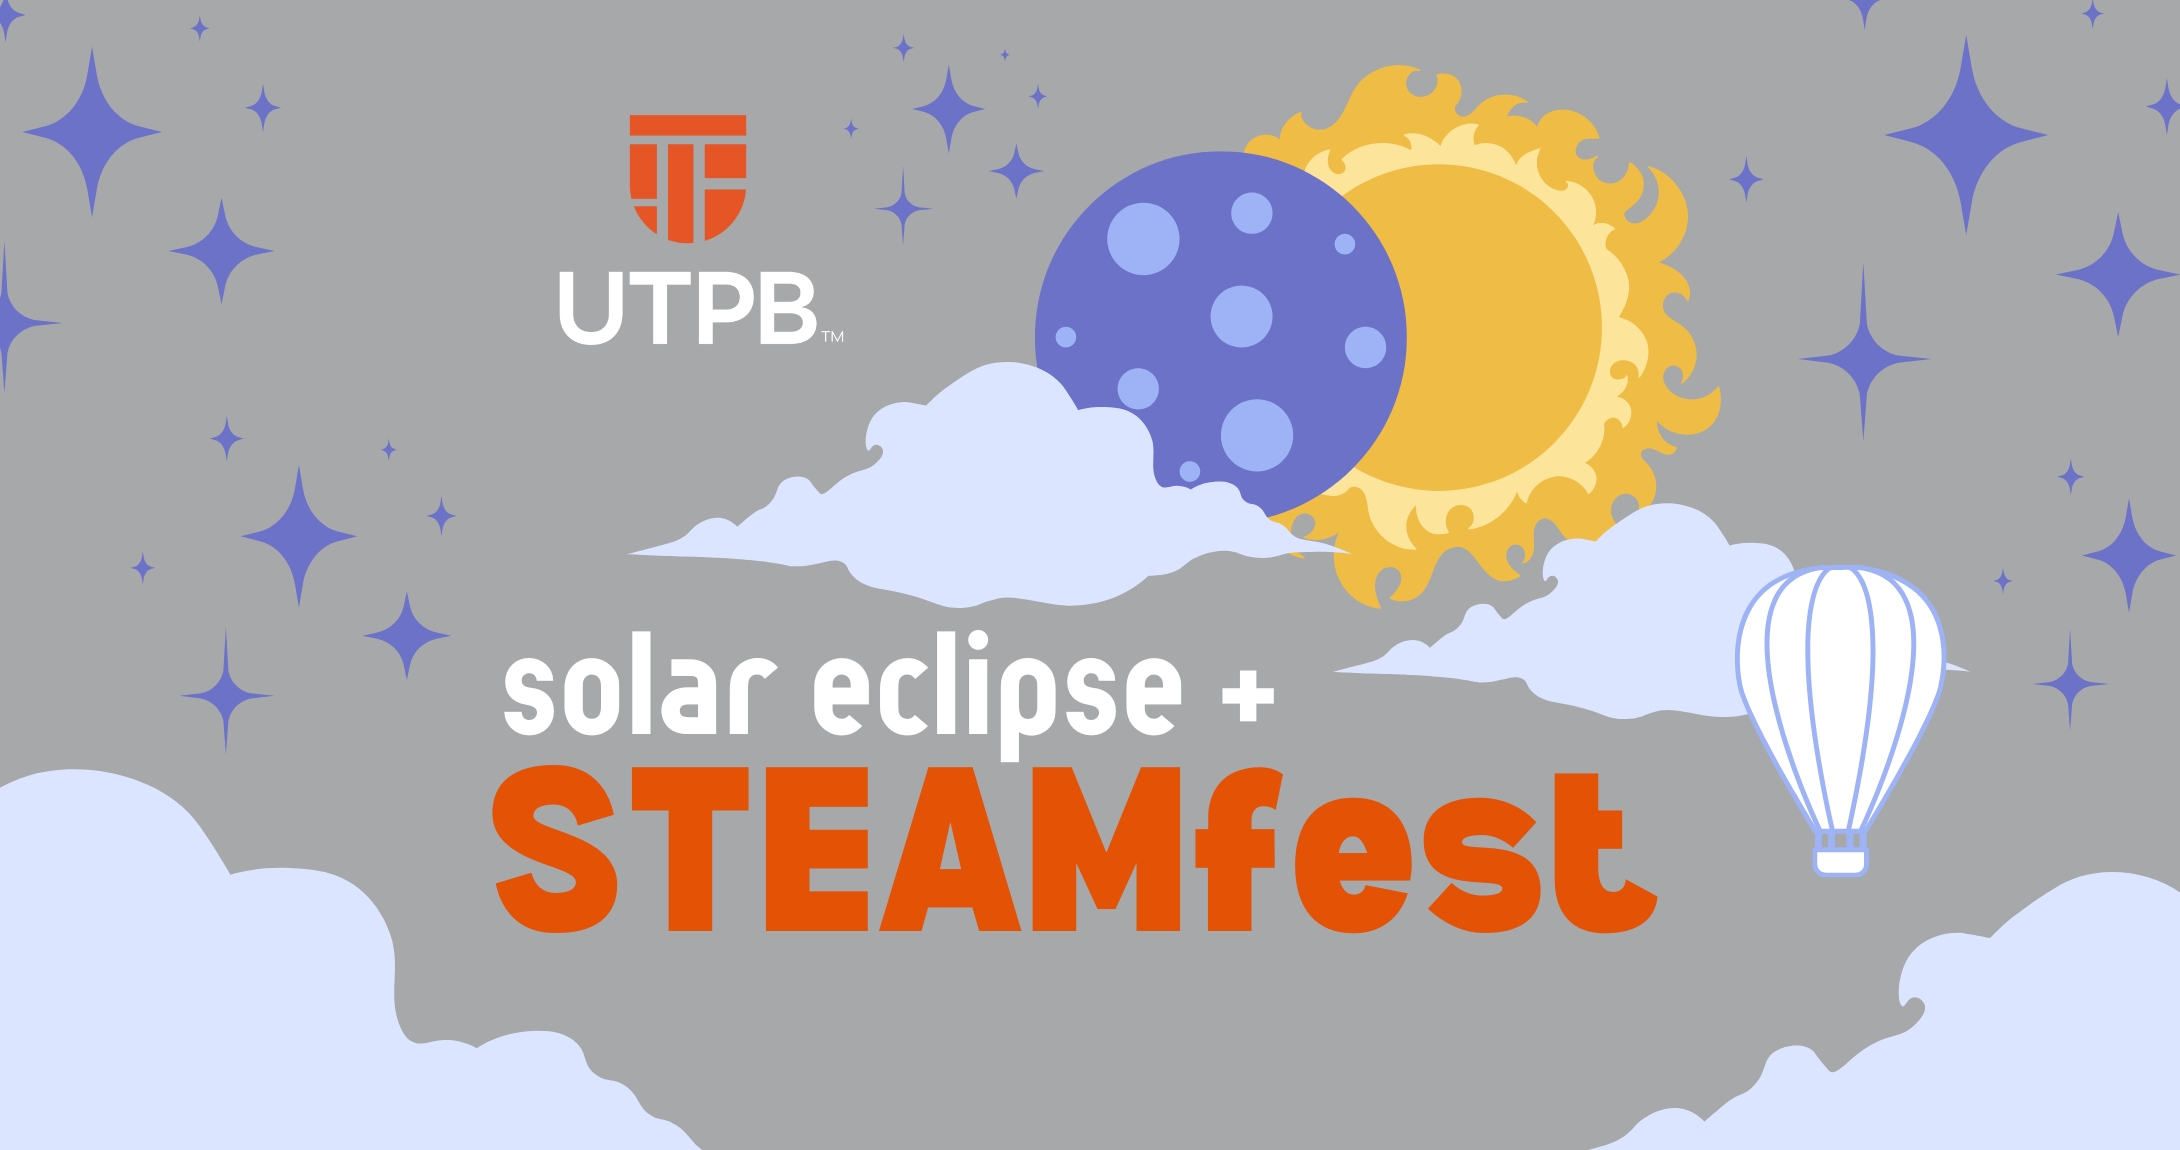 UTPB to host solar eclipse watch party with NASA and Gordon Center, STEAMfest to follow